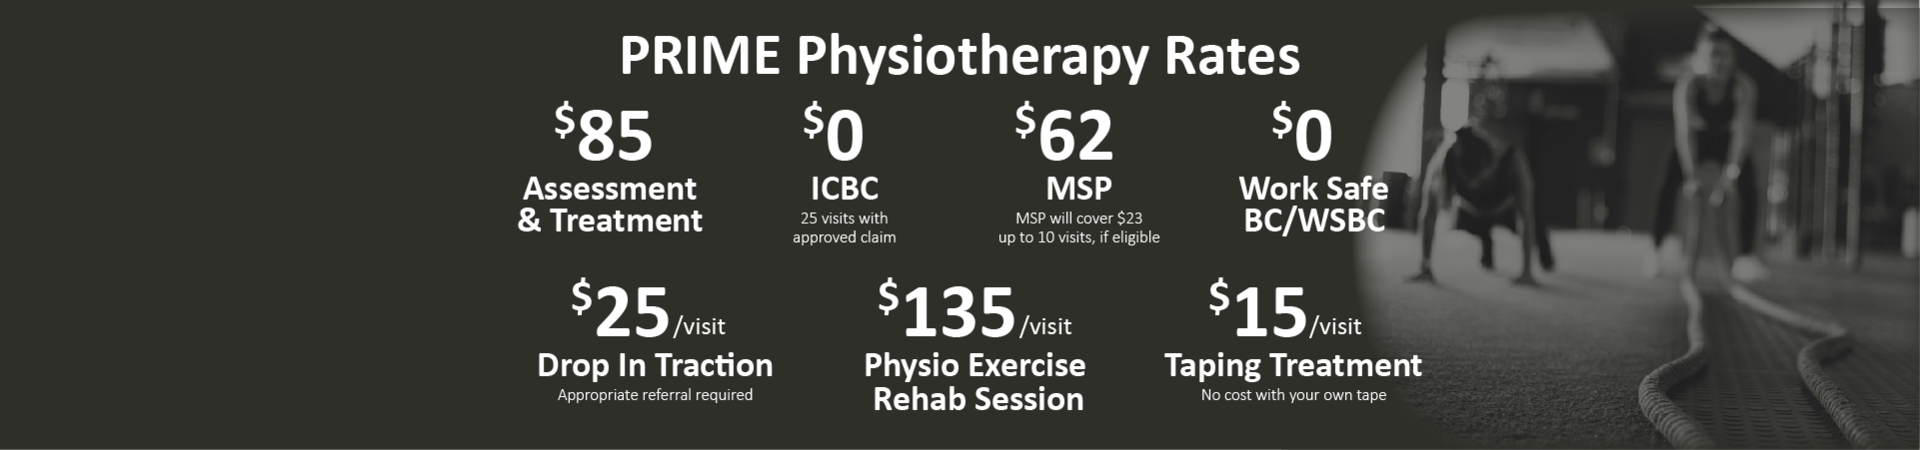 PRIME PHYSIOTHERAPY RATES